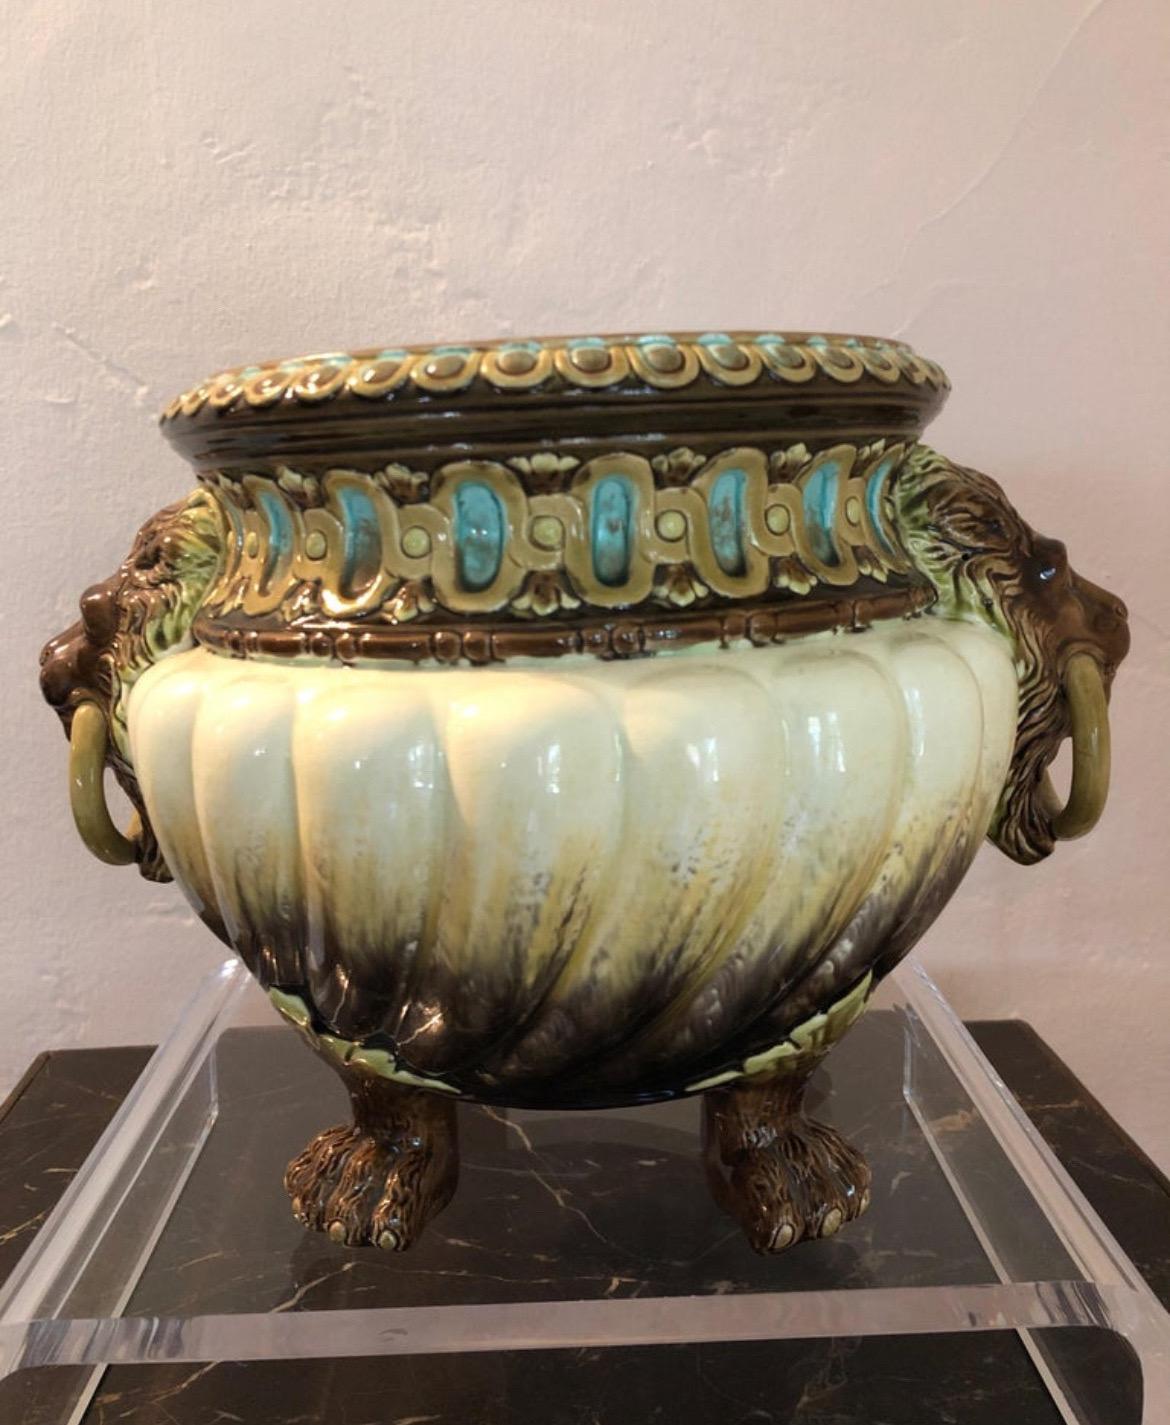 Eye-catching Art Nouveau jardinière by Julius Dressler.
Stamped and numbered on bottom. 

Gorgeous shades of greens, teal and brown with lion heads holding rings. 

Beautiful representation of Majolica.